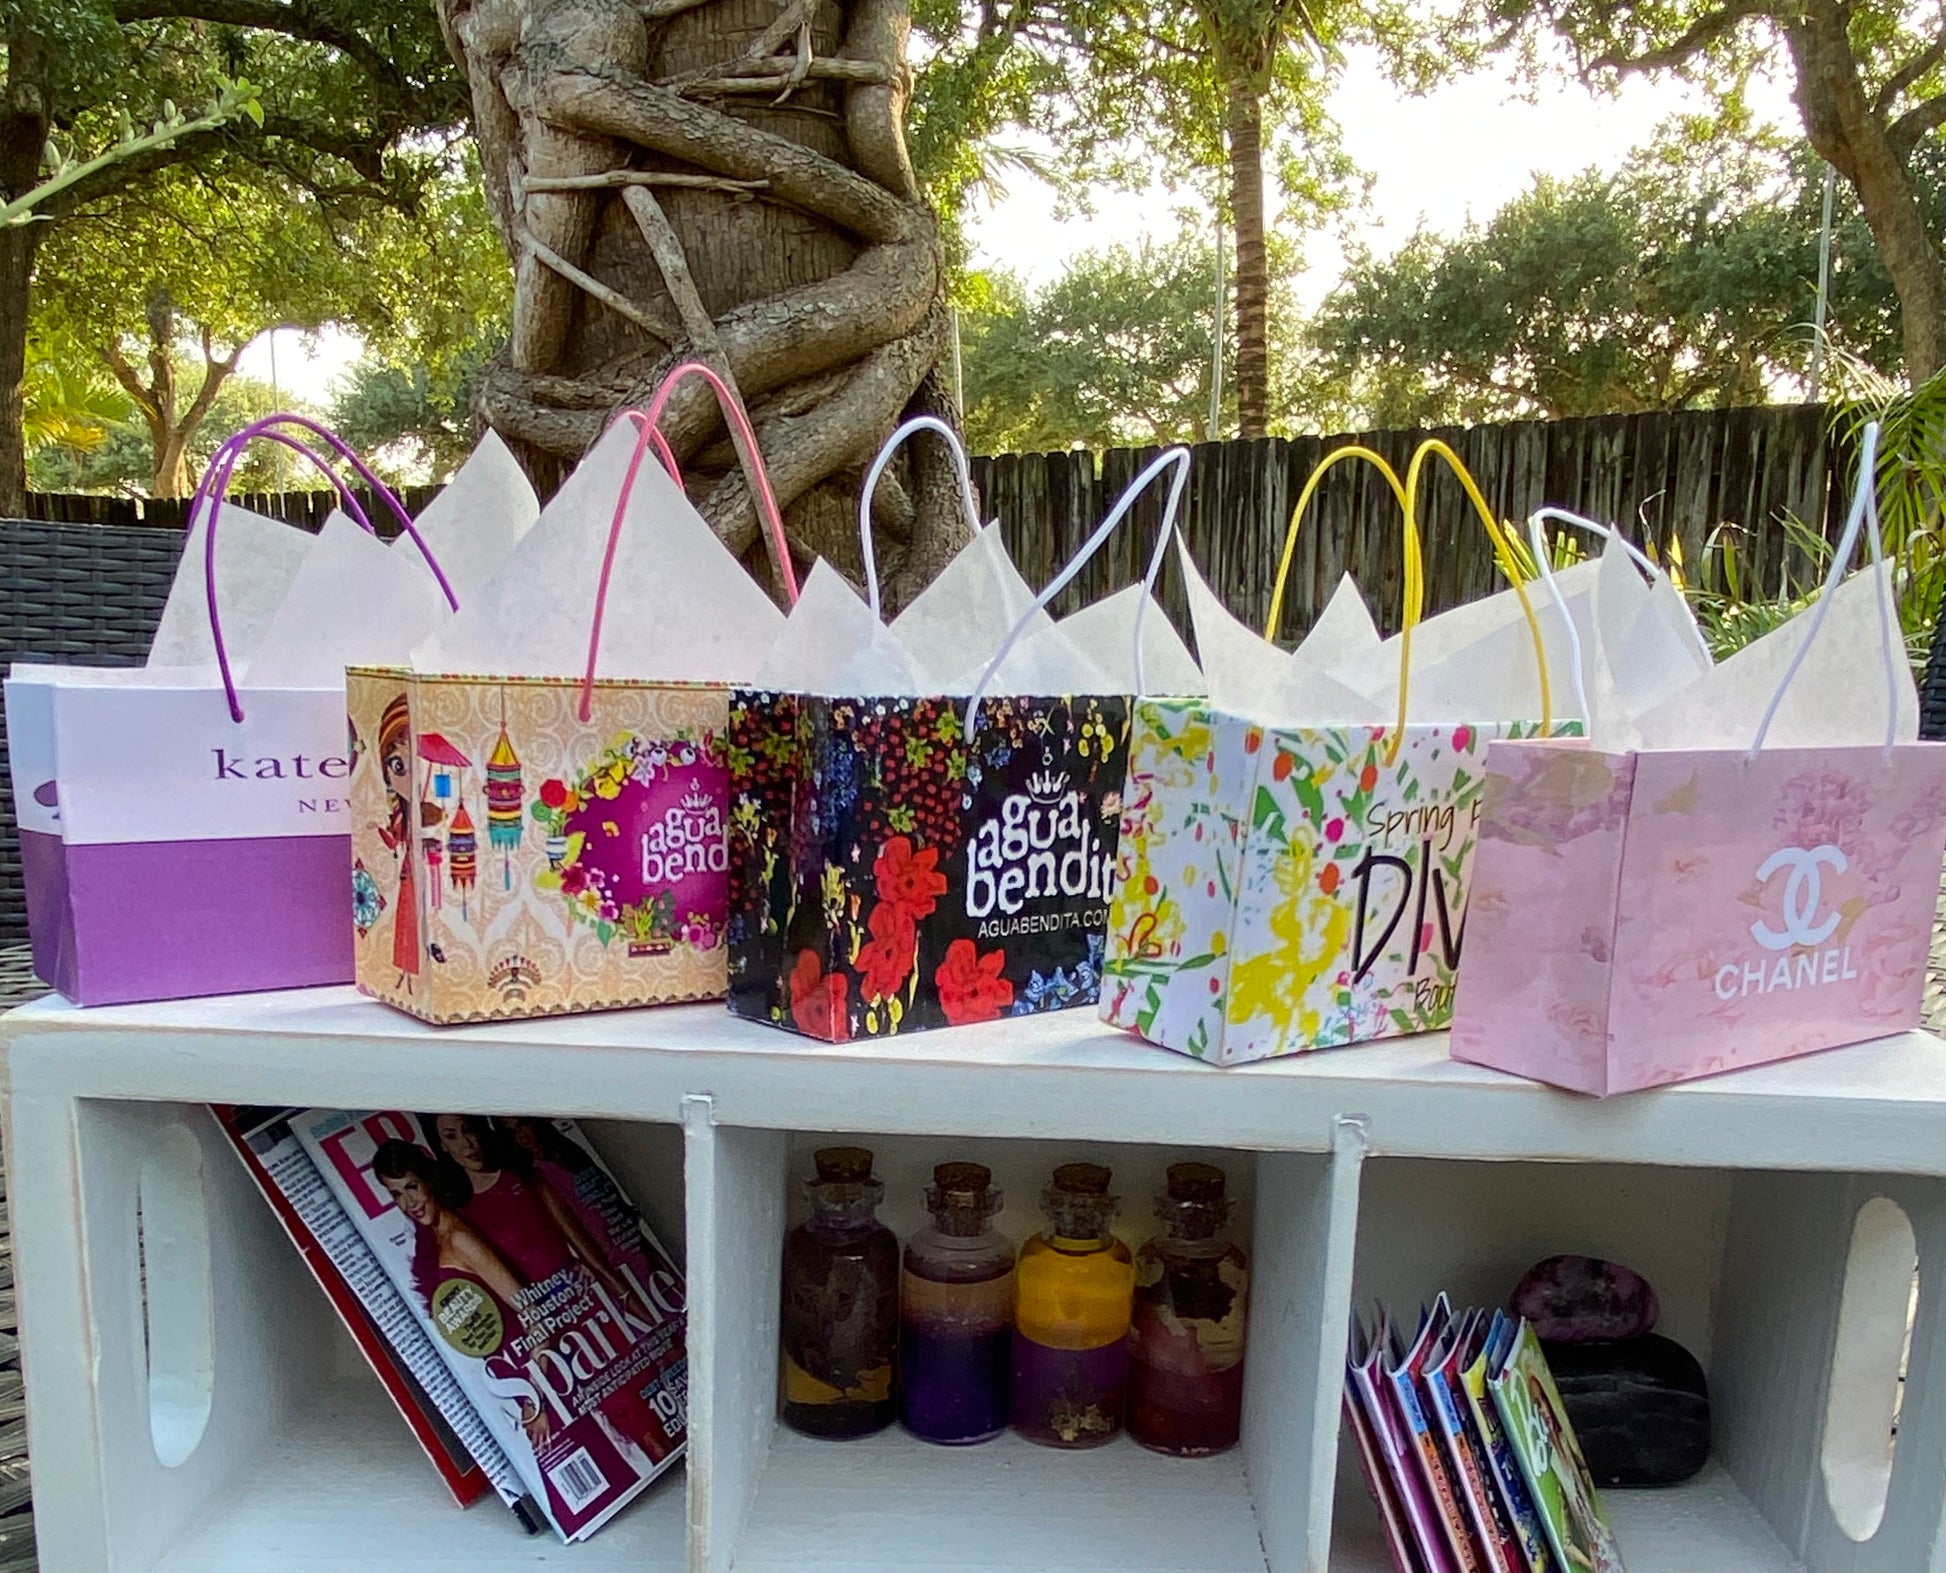 SET OF 5 Miniature Shopping Bags for Fashion Dolls